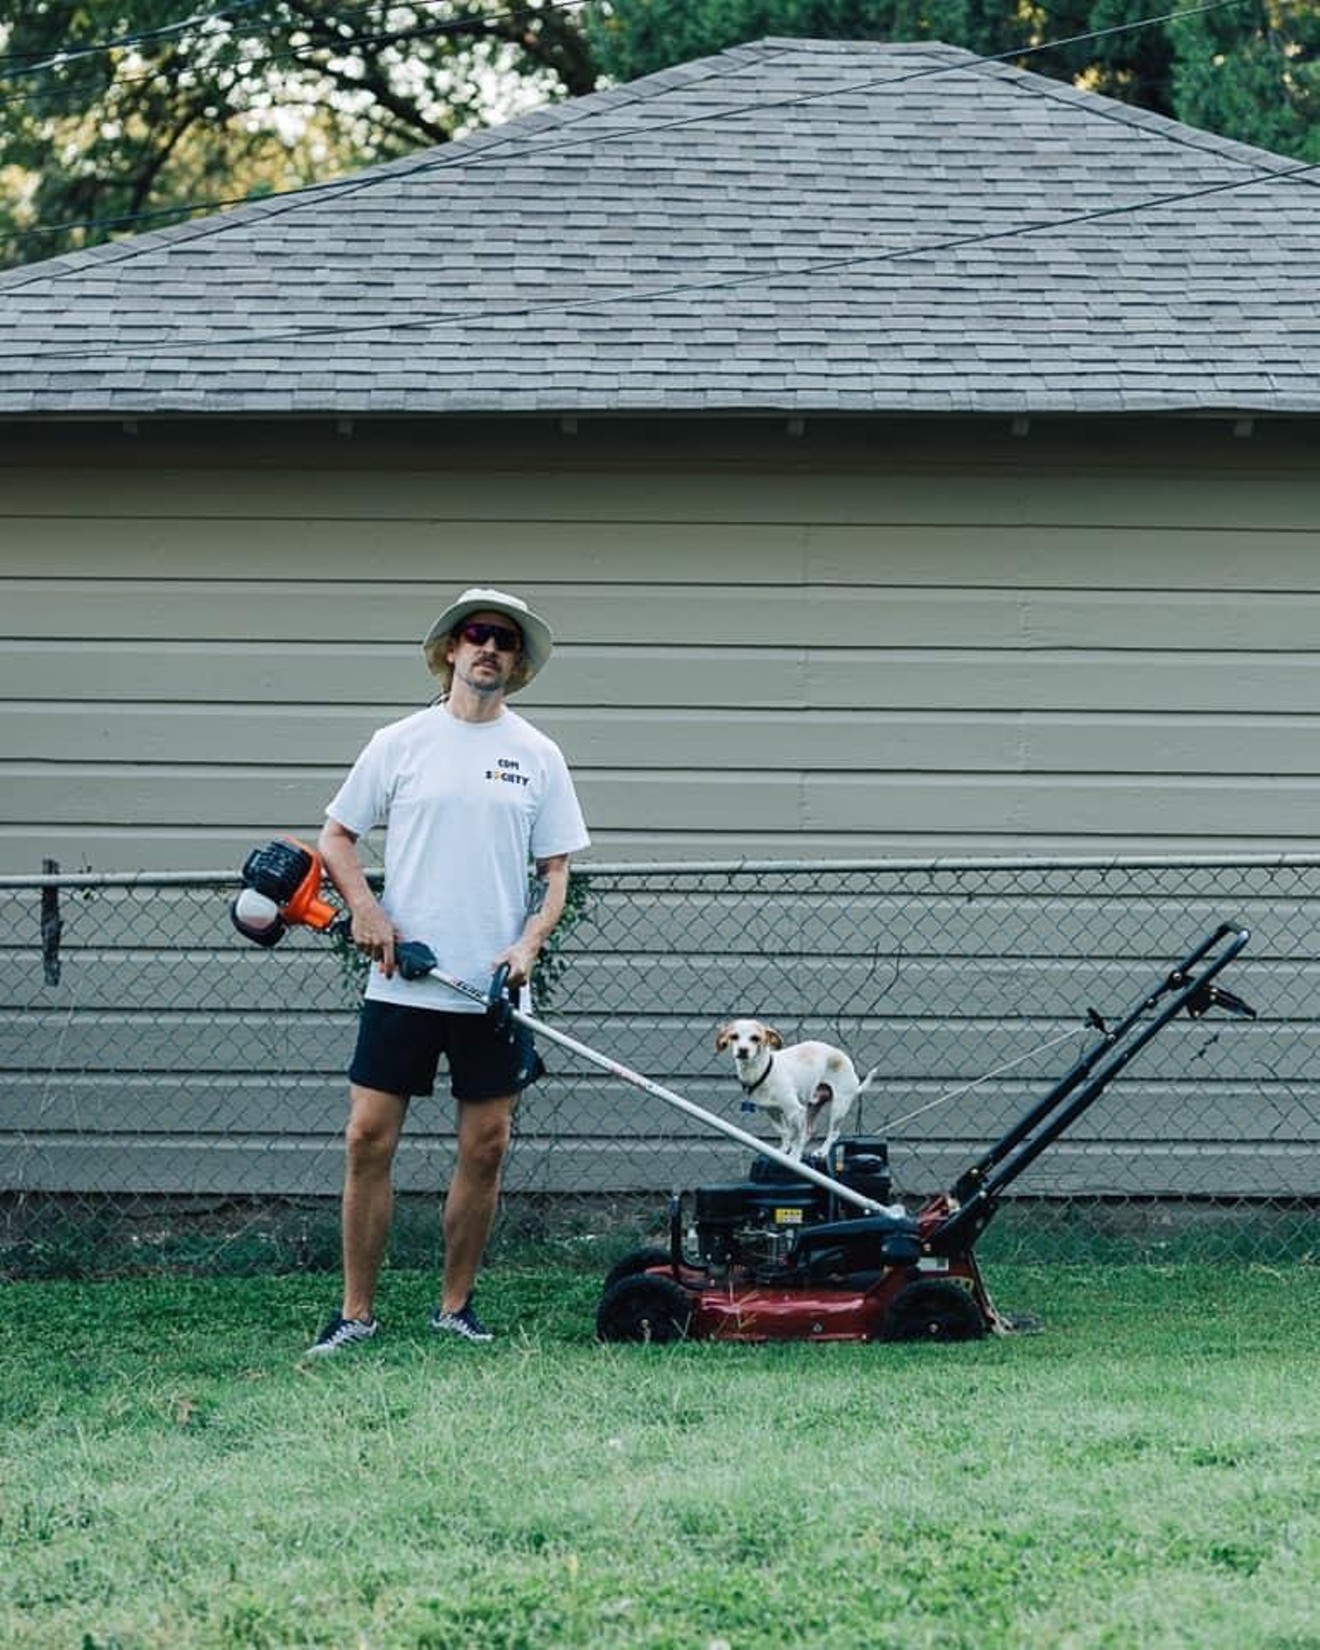 DJ Sober opened a lawn service company with his business partner Herby.